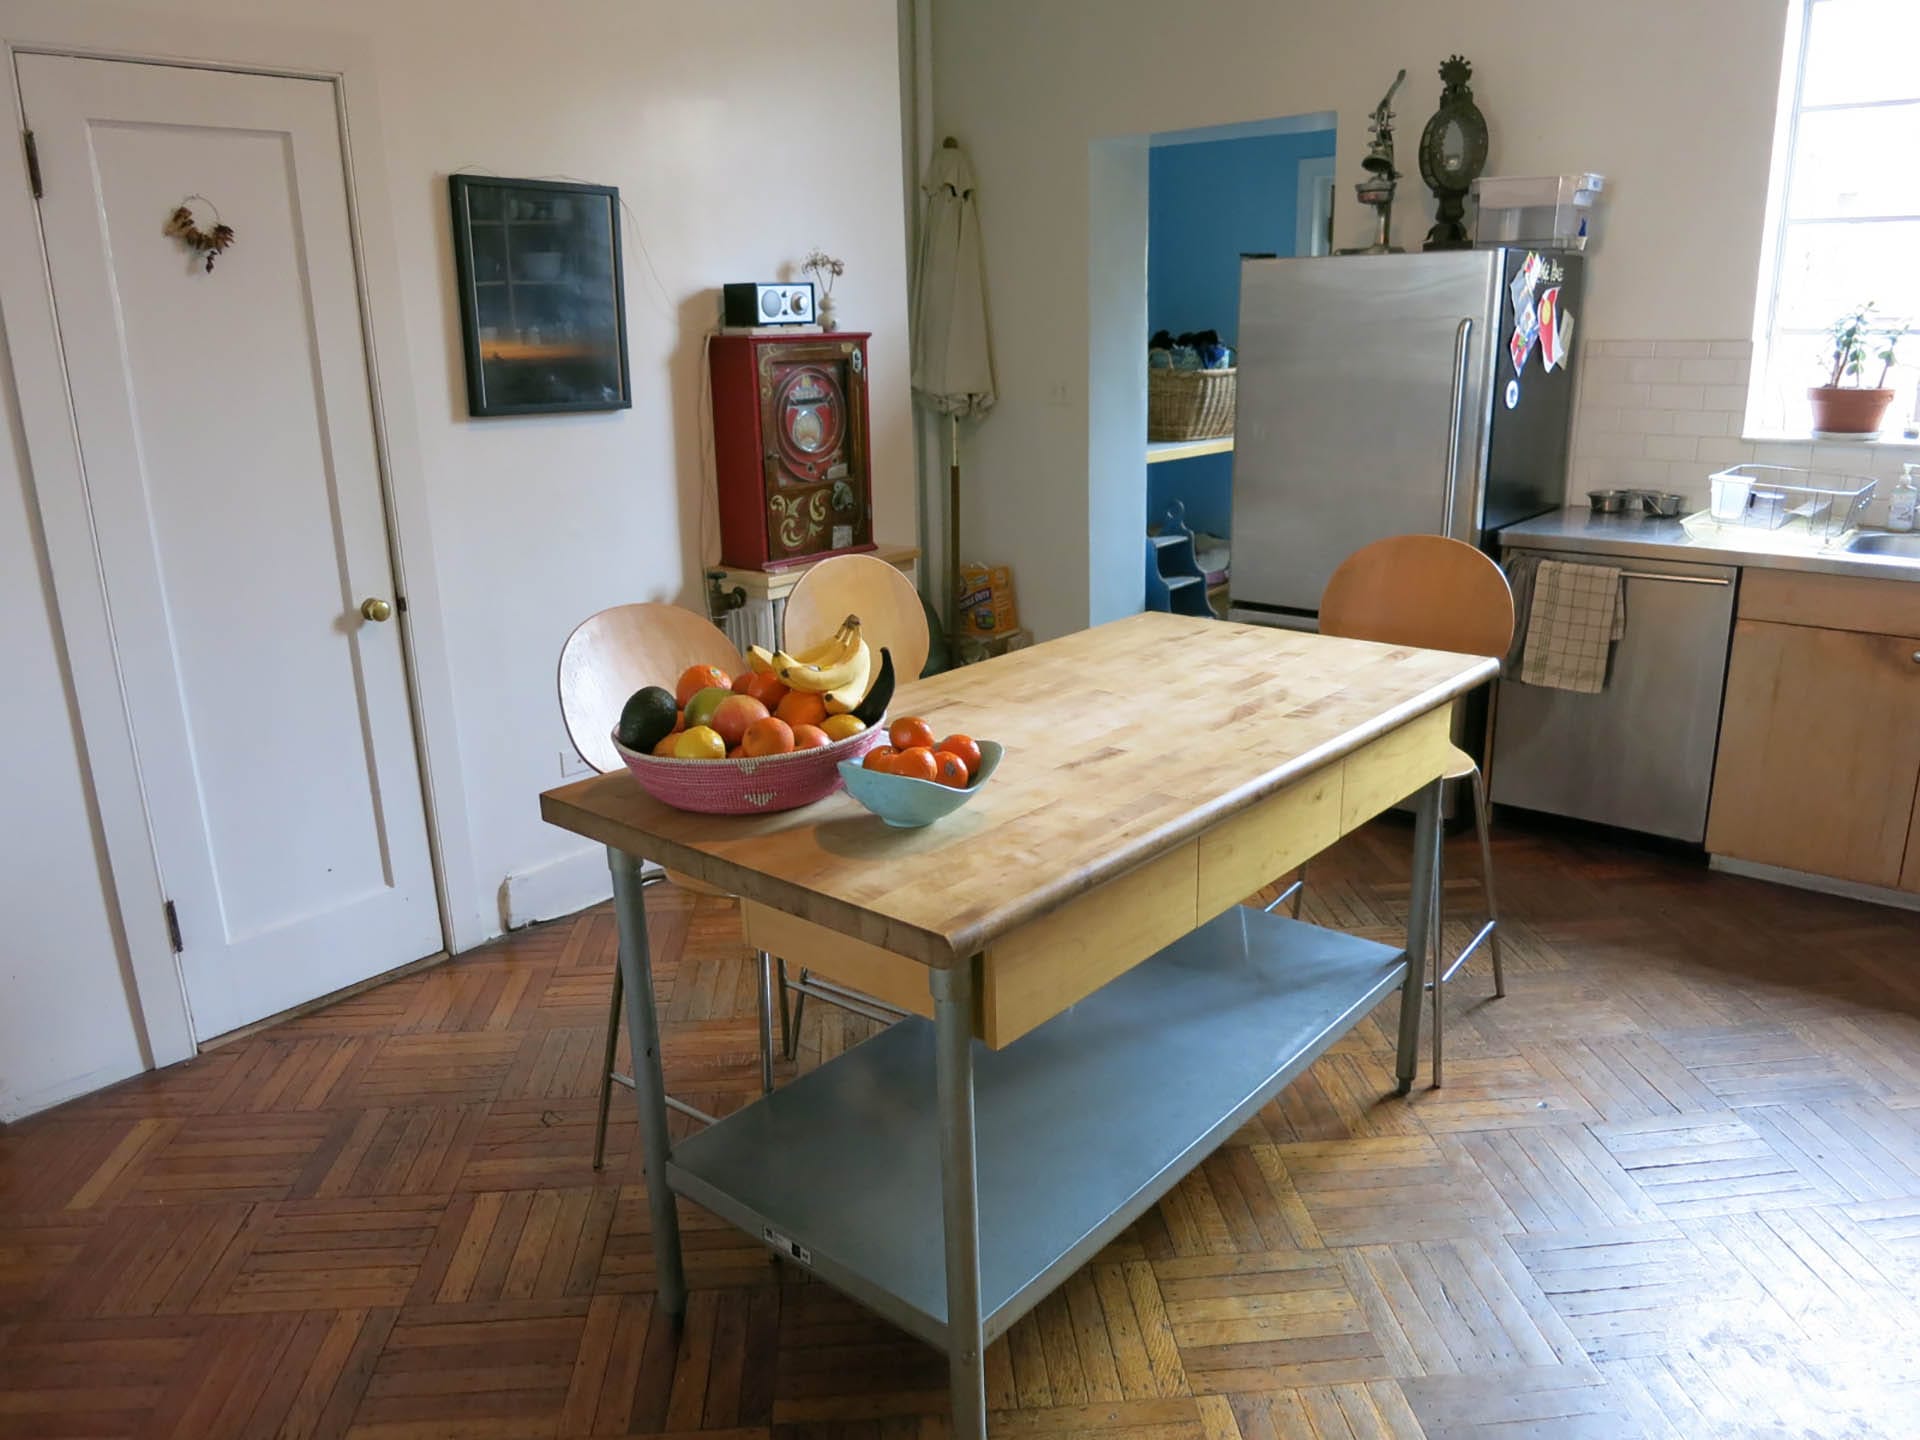 Kitchen before our renovation, with parquet wood floors, a portable island, and stainless steel appliances.